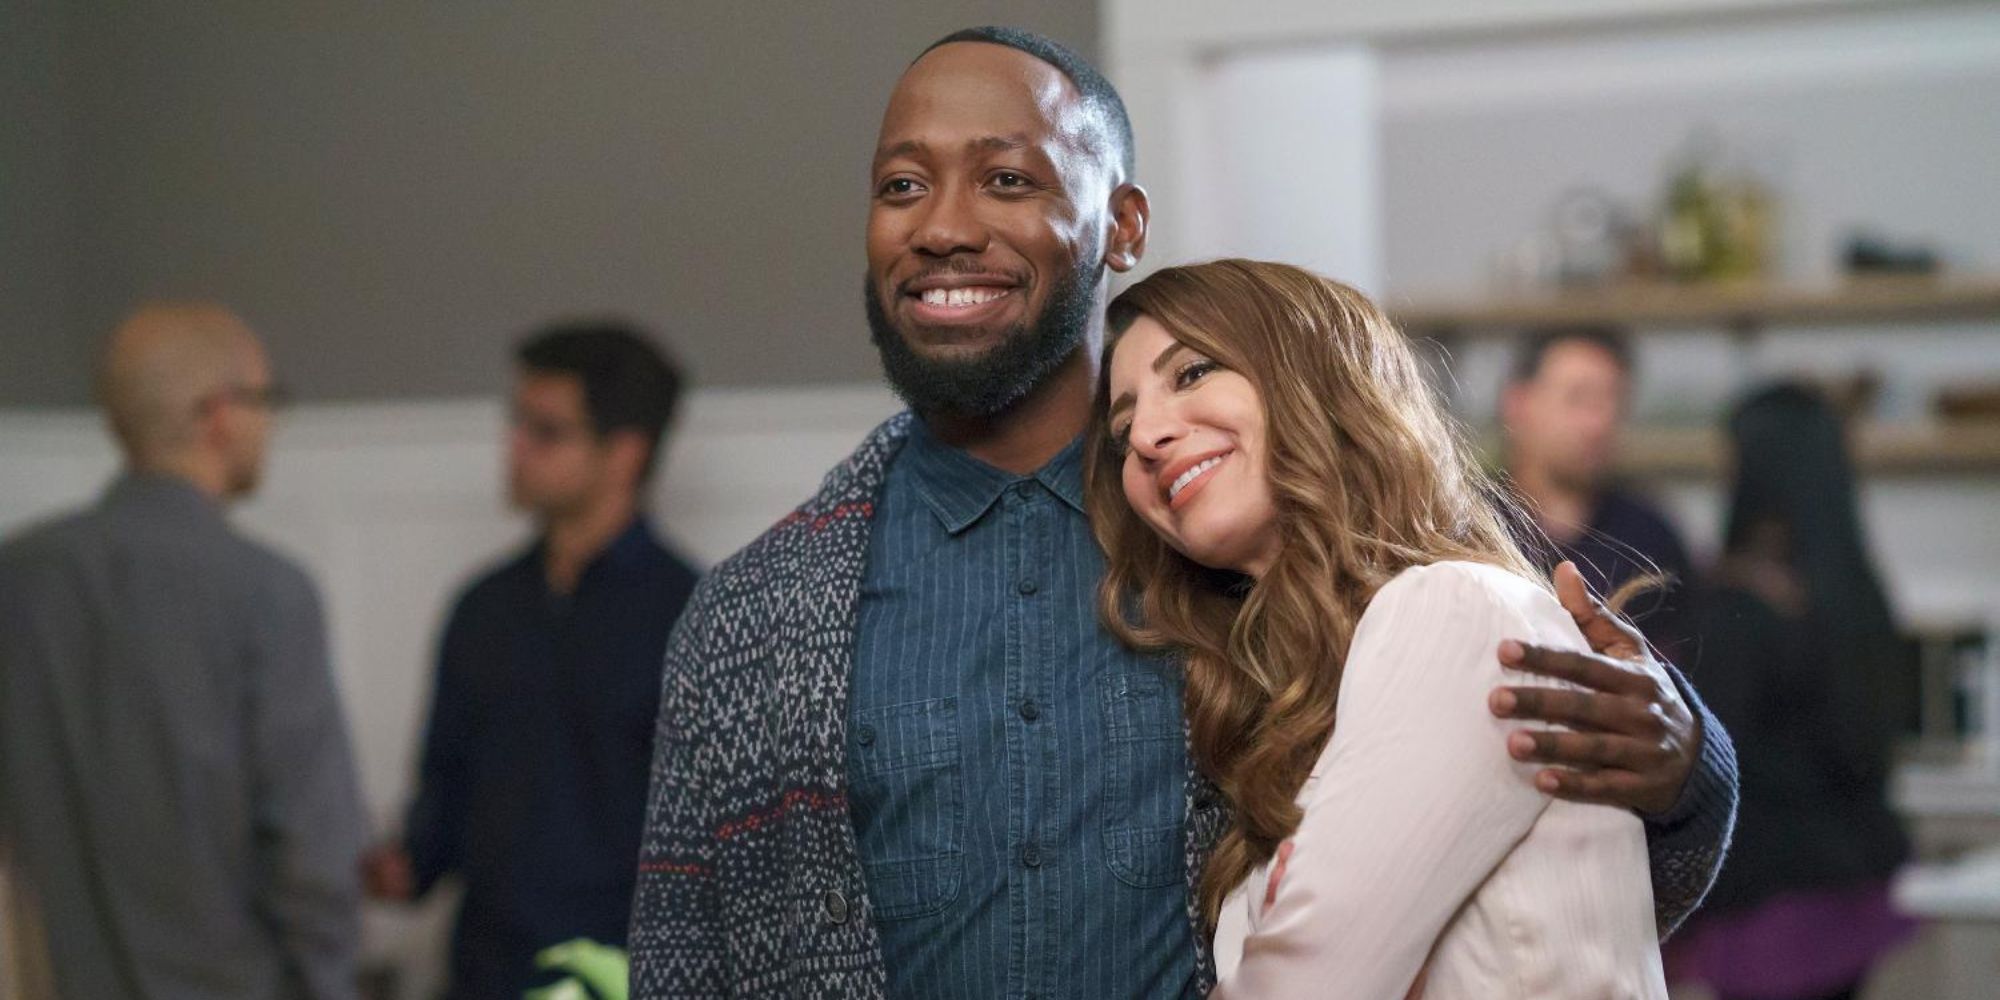 Winston and Aly from New Girl hugging